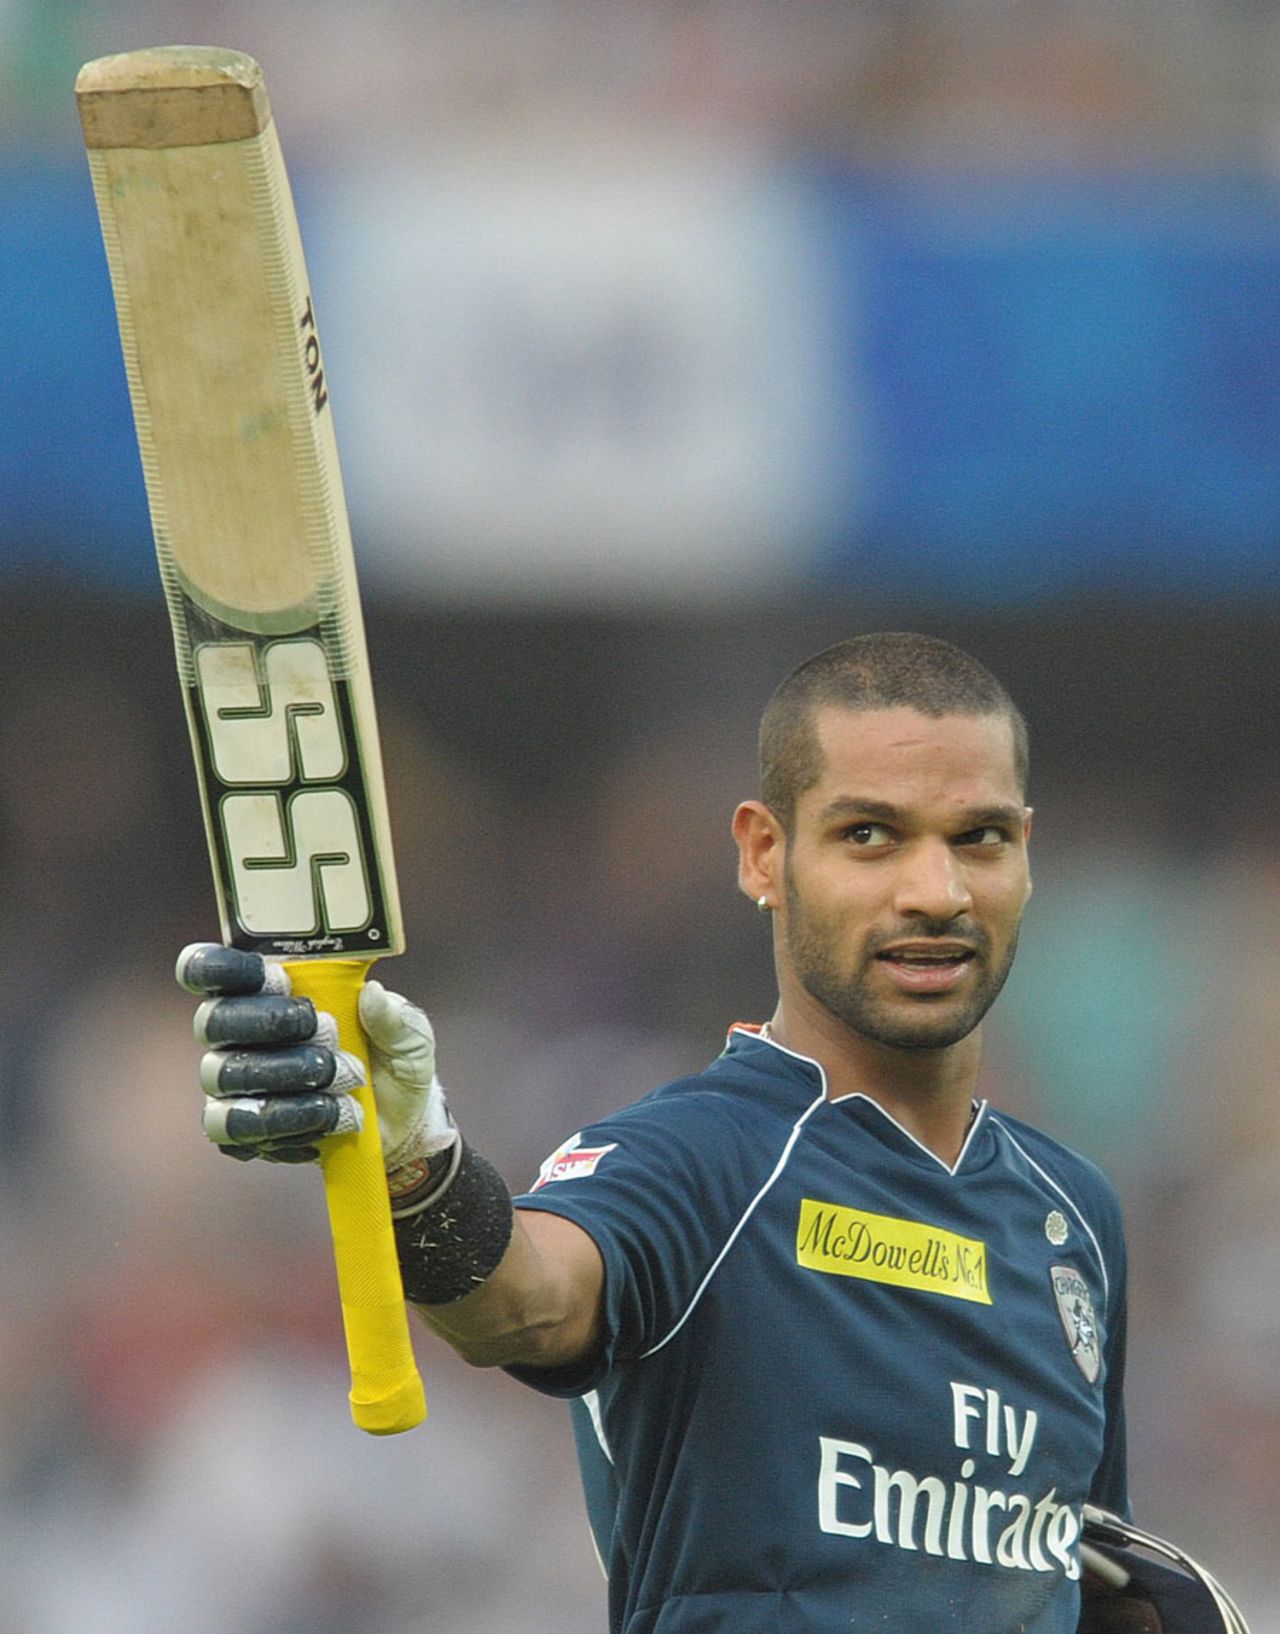 Shikhar Dhawan continued to pile on the runs, Deccan Chargers v Delhi Daredevils, IPL 2012, Hyderabad